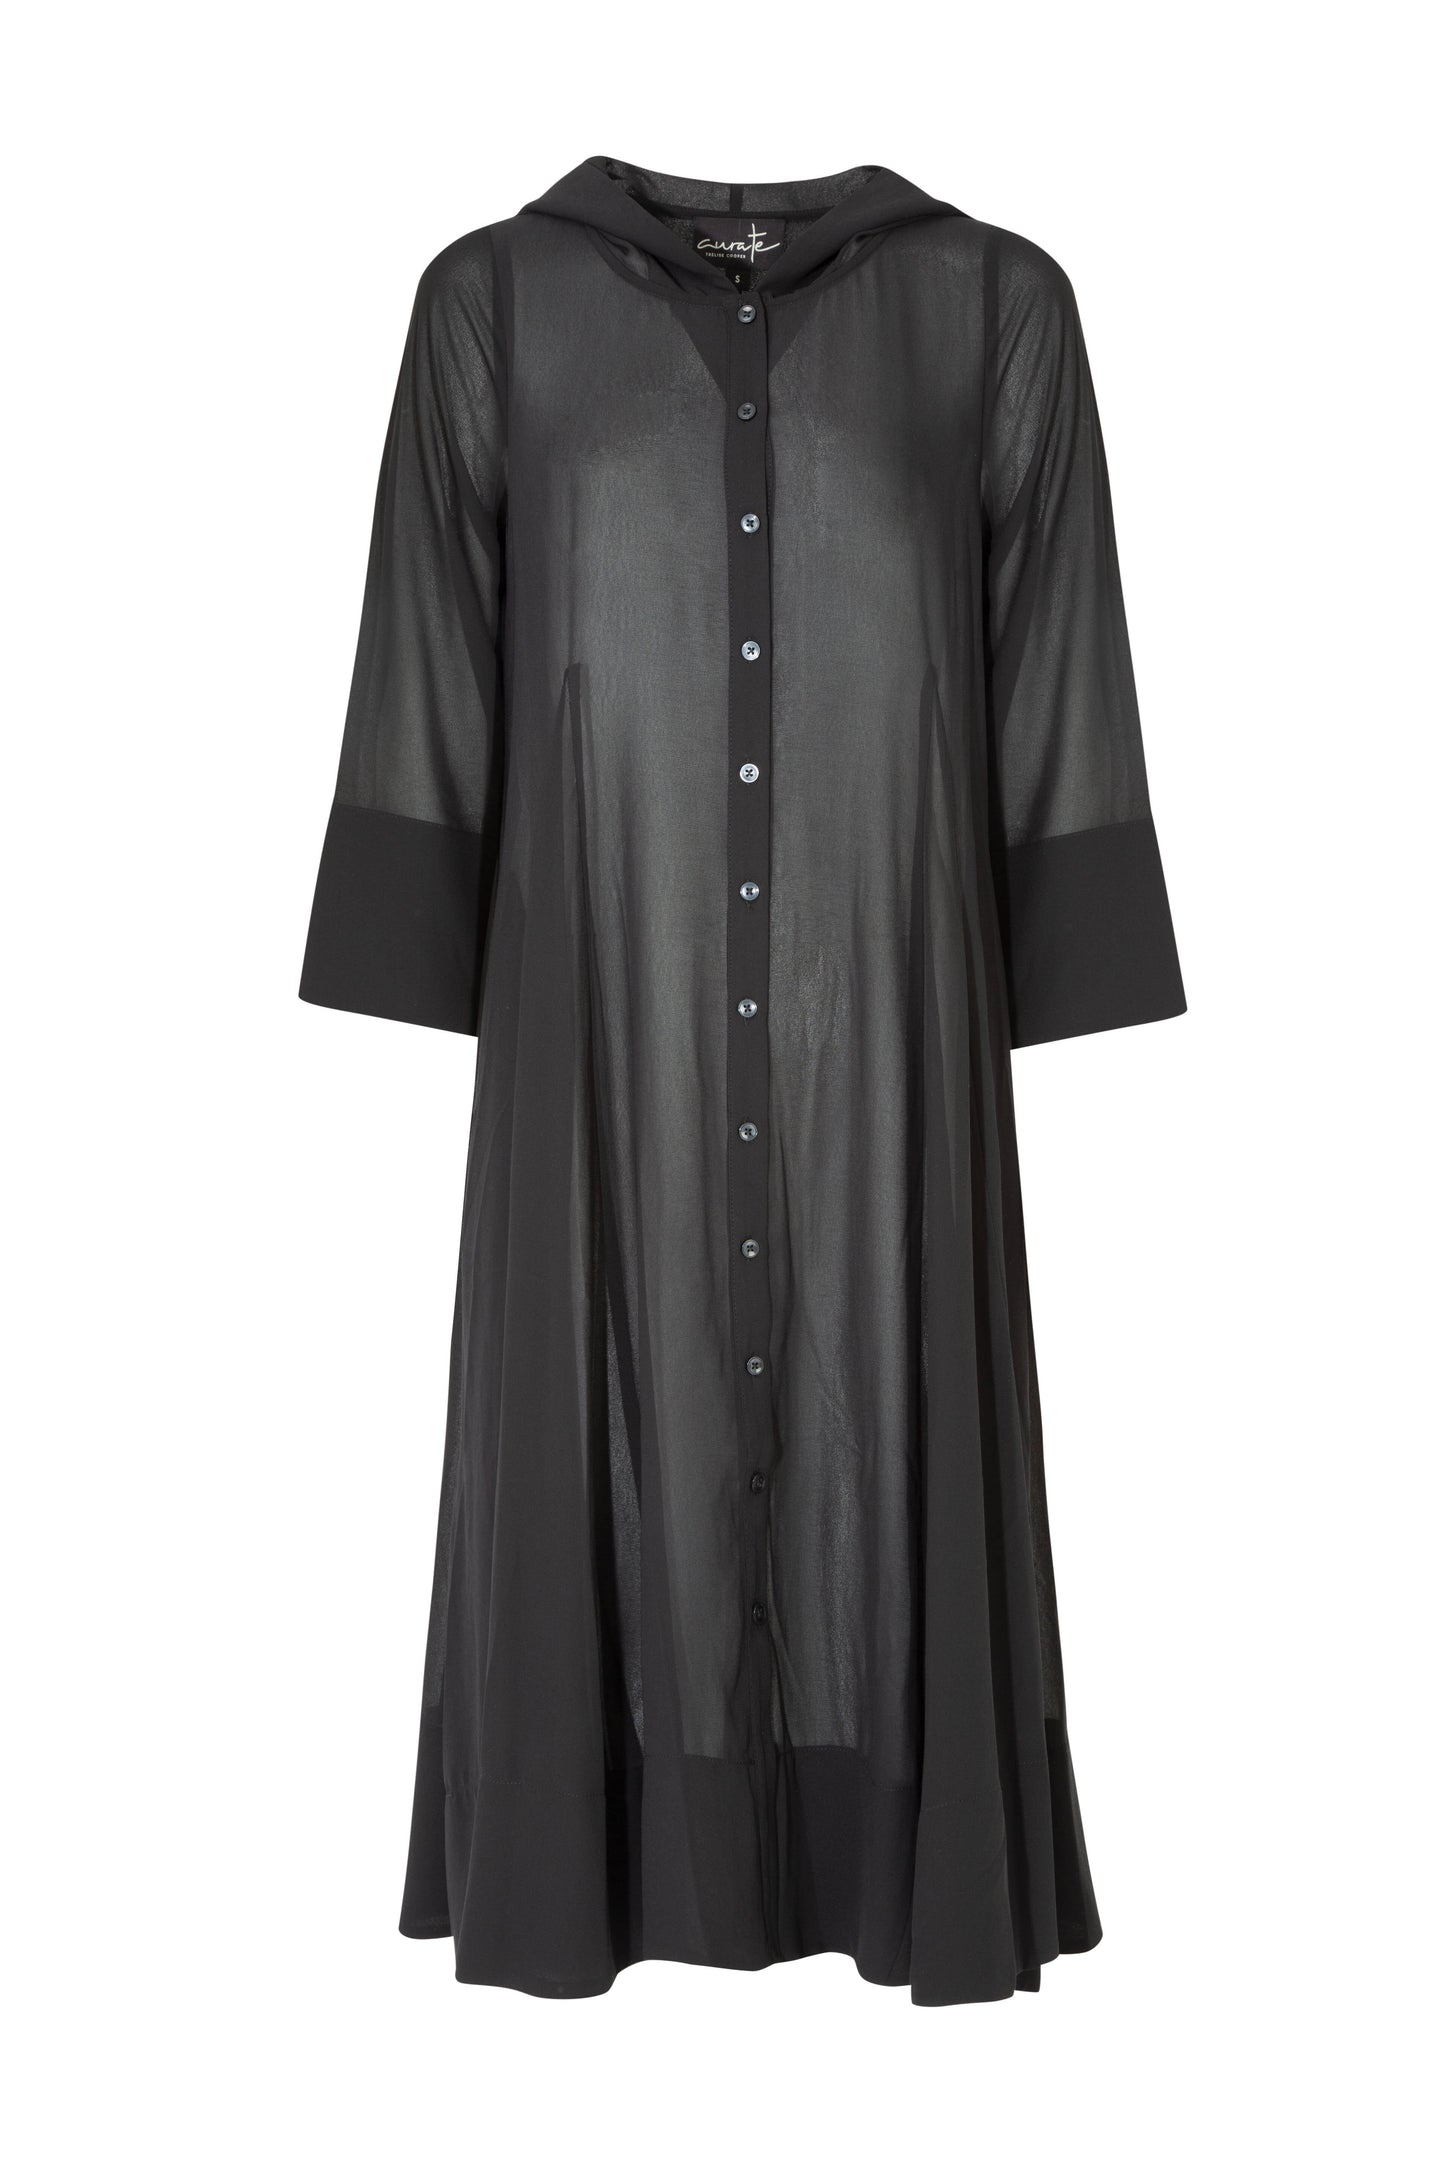 CURATE UNDERCOVER DRESS - BLACK - THE VOGUE STORE